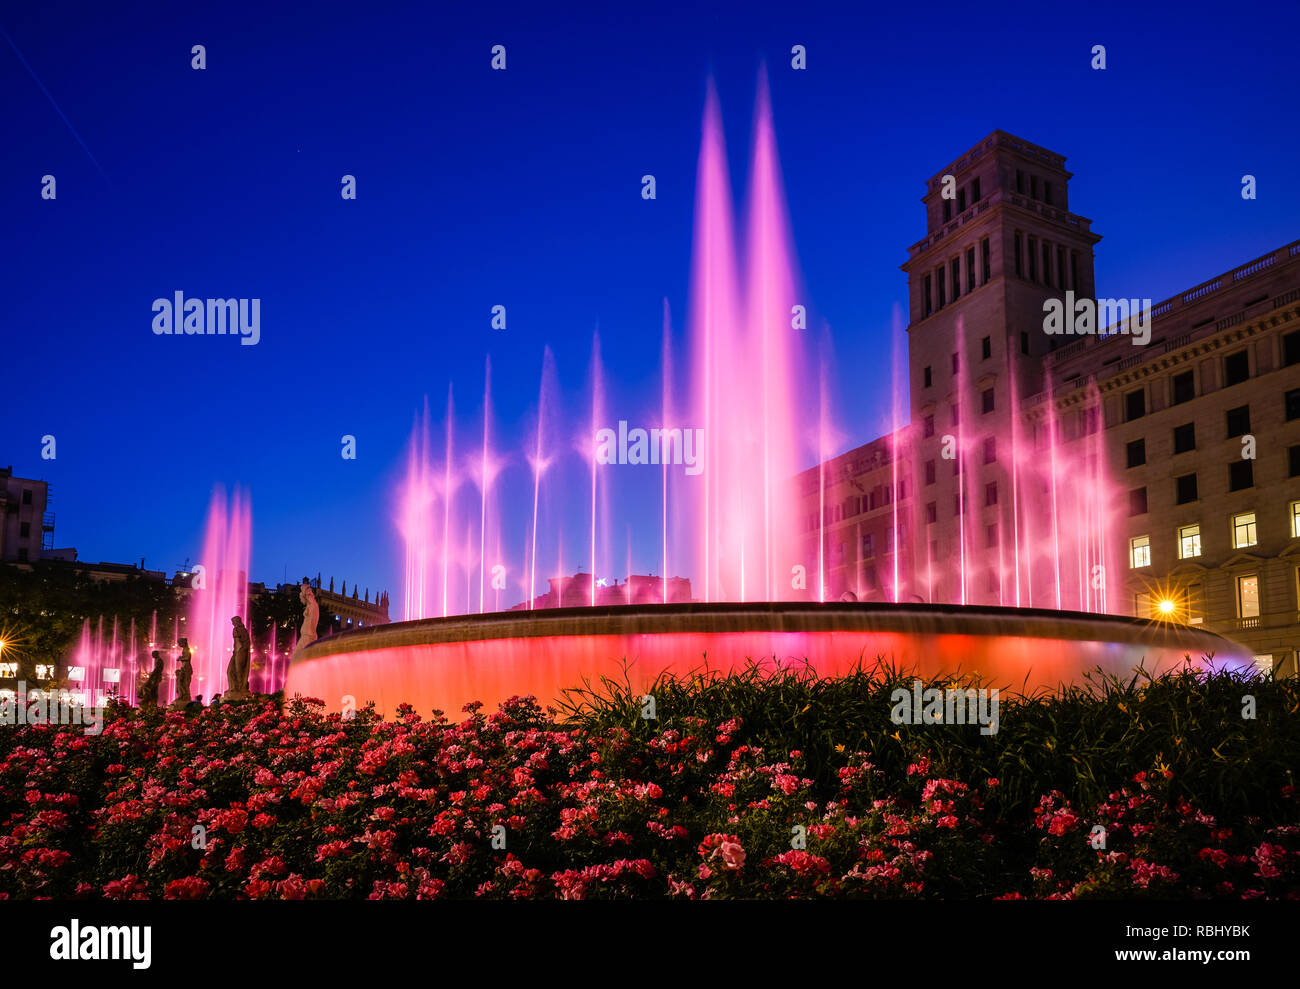 Nighttime view of the fountains on Plaza de Catalunya in Barcelona, Spain Stock Photo